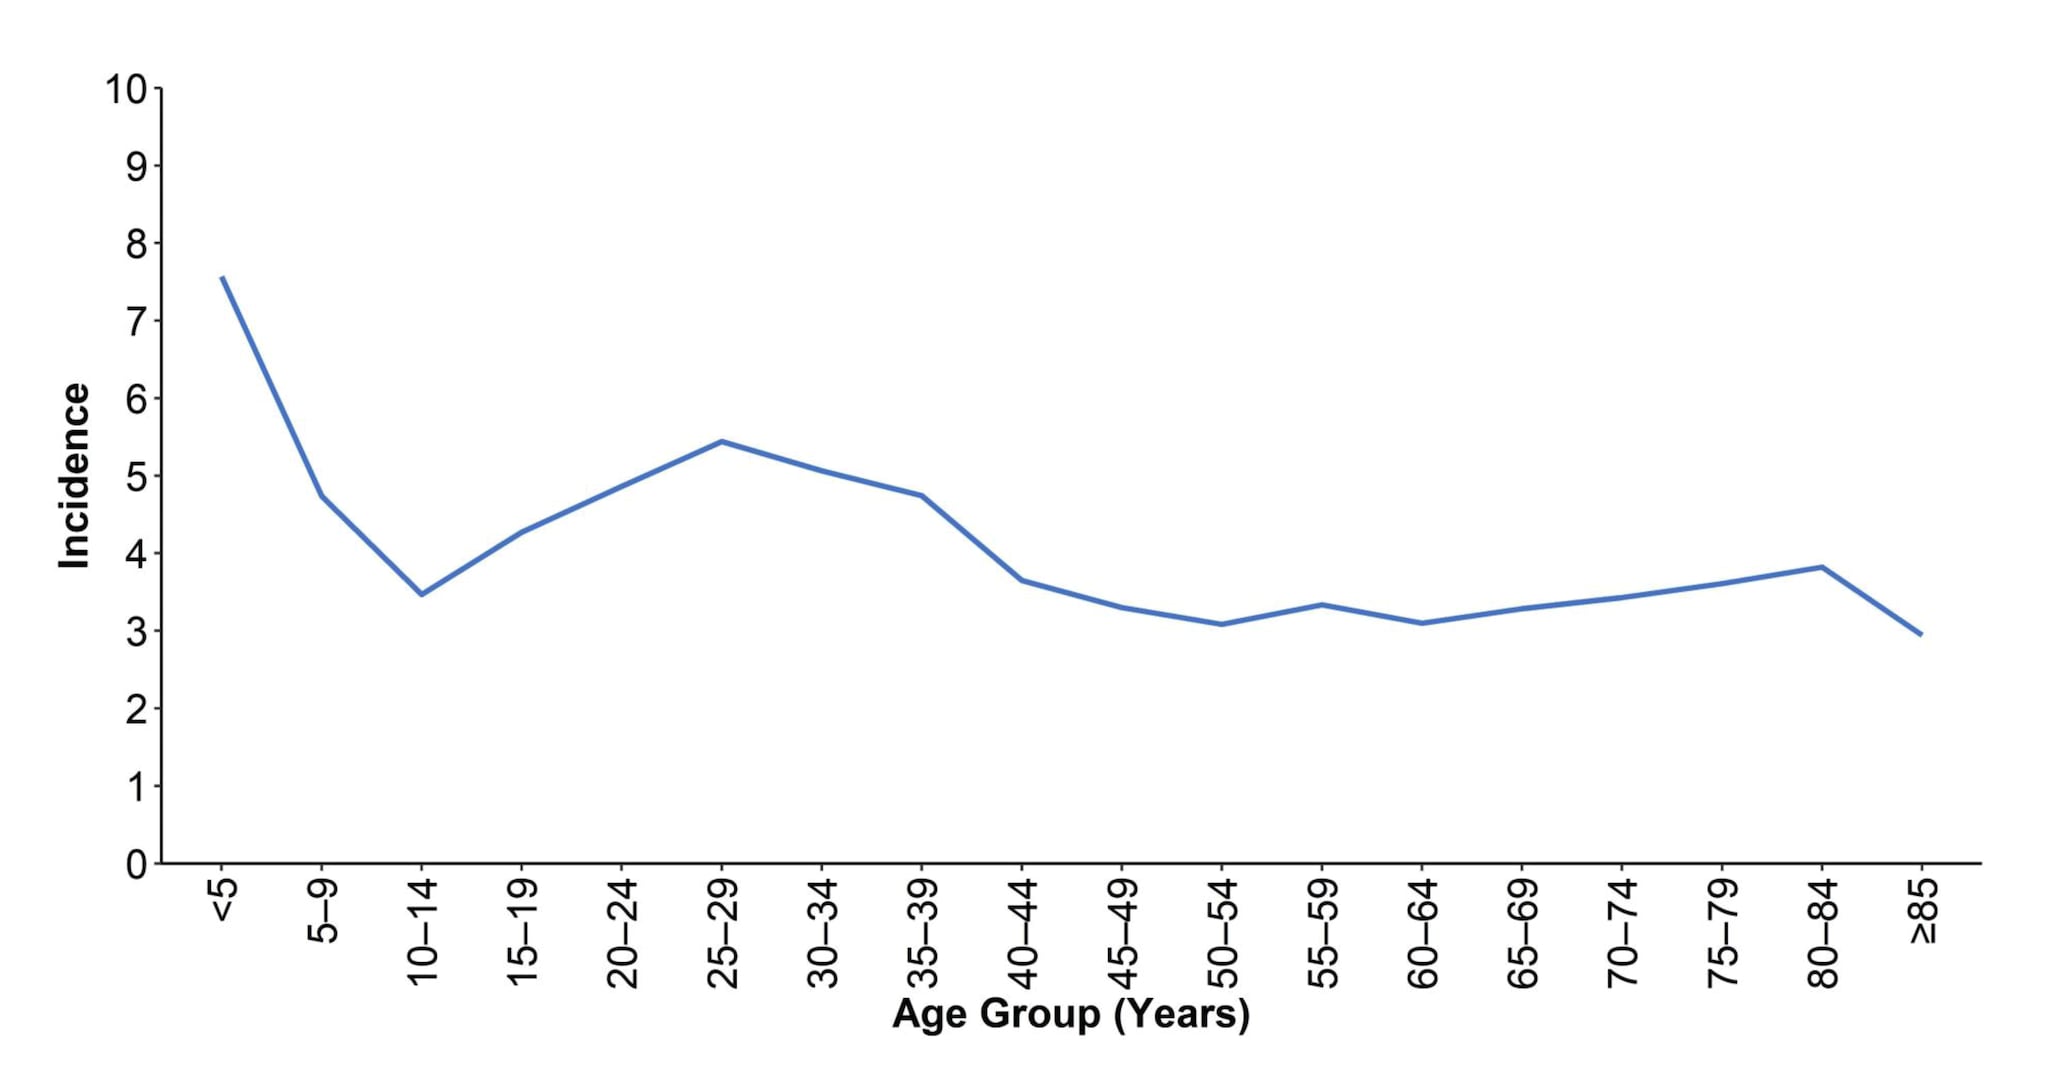 Cases by age group and sex. The scale for the incidence, from 0 to 10 cases per 100,000 population in one case per 100,000 population increments,then categories in five-year increments from 5-9 years of age through 80-84 years of age.